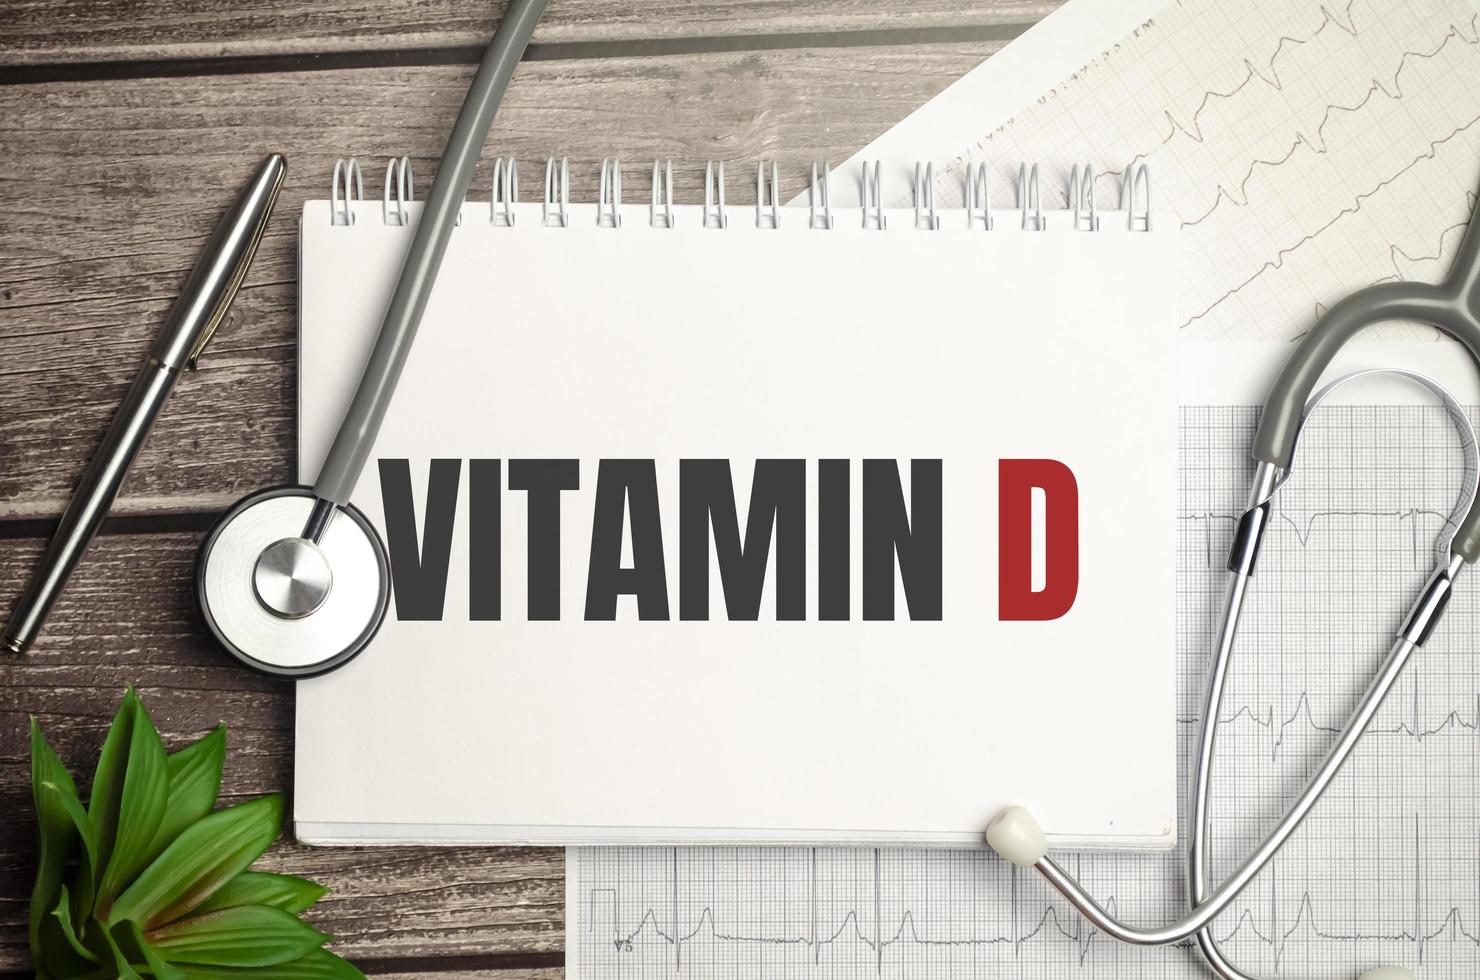 Text VITAMIN D on notebook with stethoscope and pen on wooden background photo